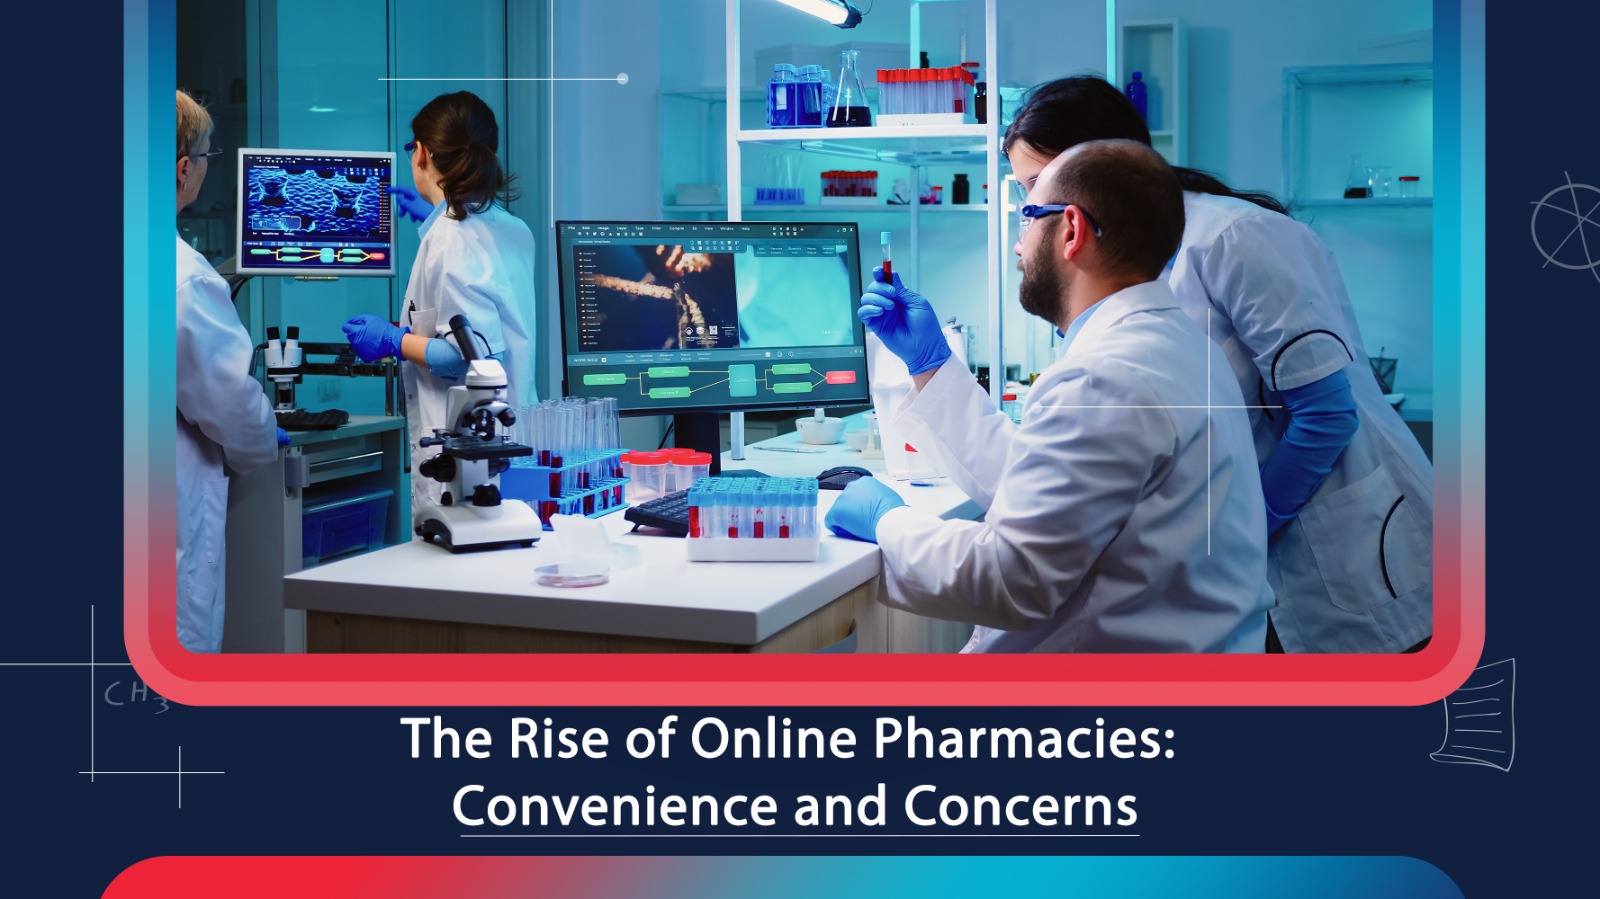 The Rise of Online Pharmacies: Convenience and Concerns